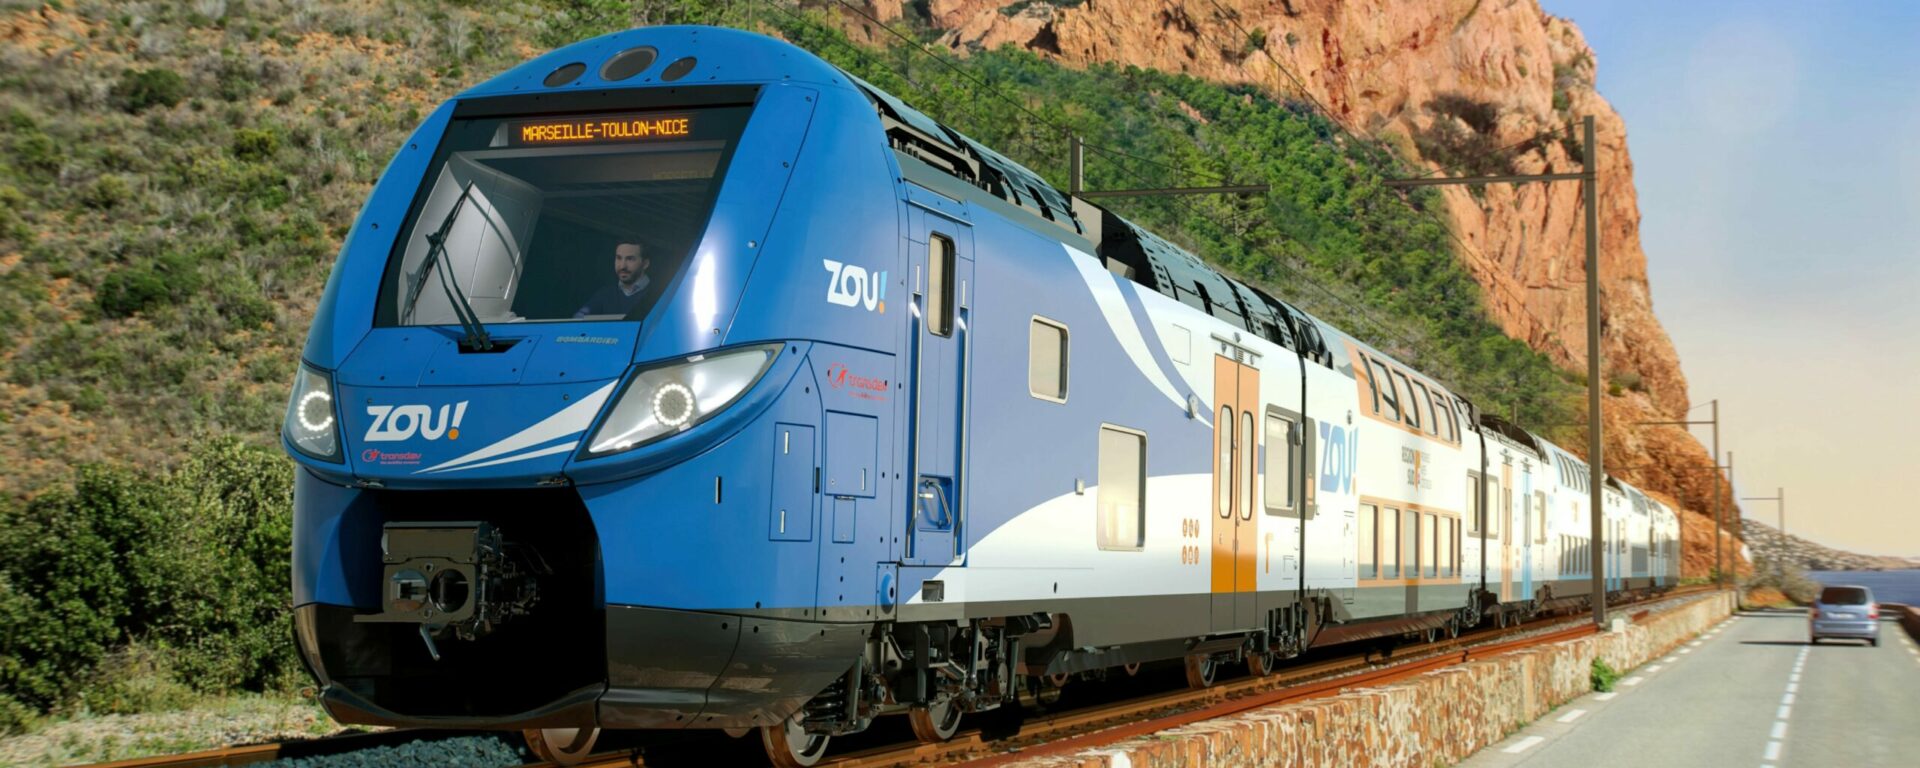 Exterior view of the Omneo Premium train for the Marseille-Nice line – Non-contractual design for illustration purposes (©Alstom / Yellow Window)